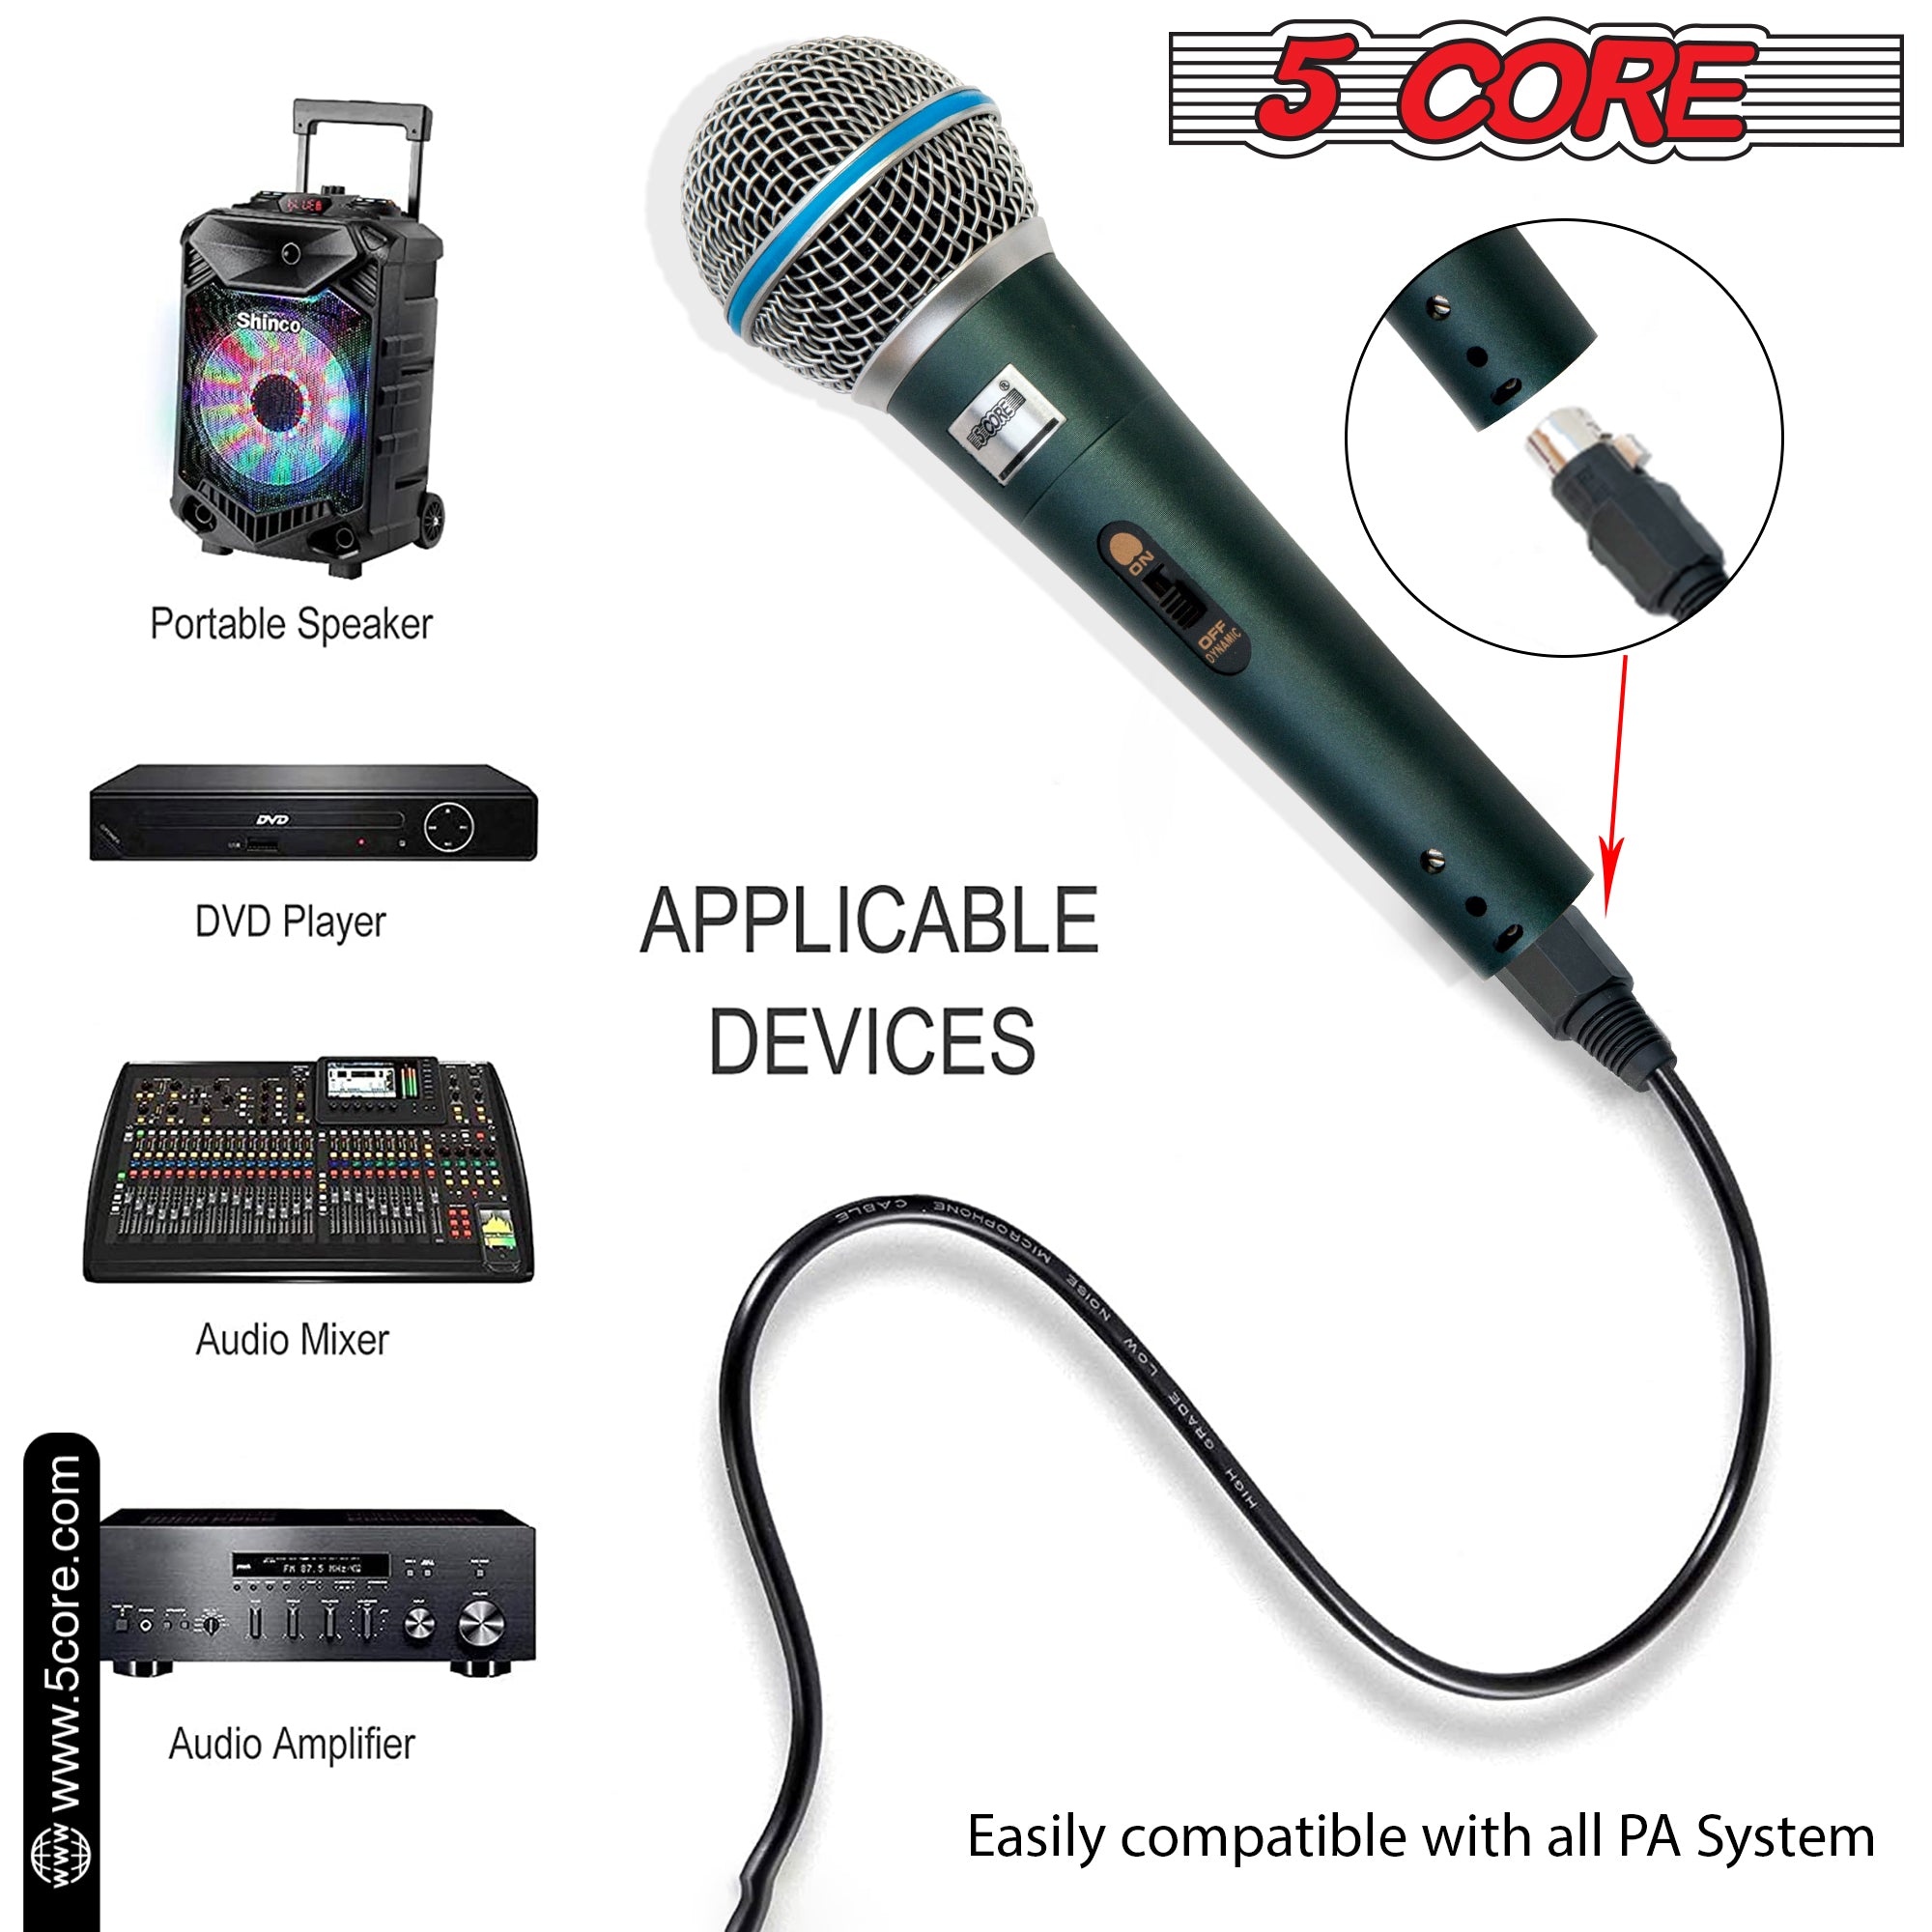 5 Core Microphone 1 Piece Green Karaoke XLR Wired Professional Studio Mic w ON/OFF Switch Integrated Pop Filter Dynamic Cardioid Unidirectional Handheld Micrófono for Singing DJ Speeches Includes Cable Mic Holder Bag - BETA